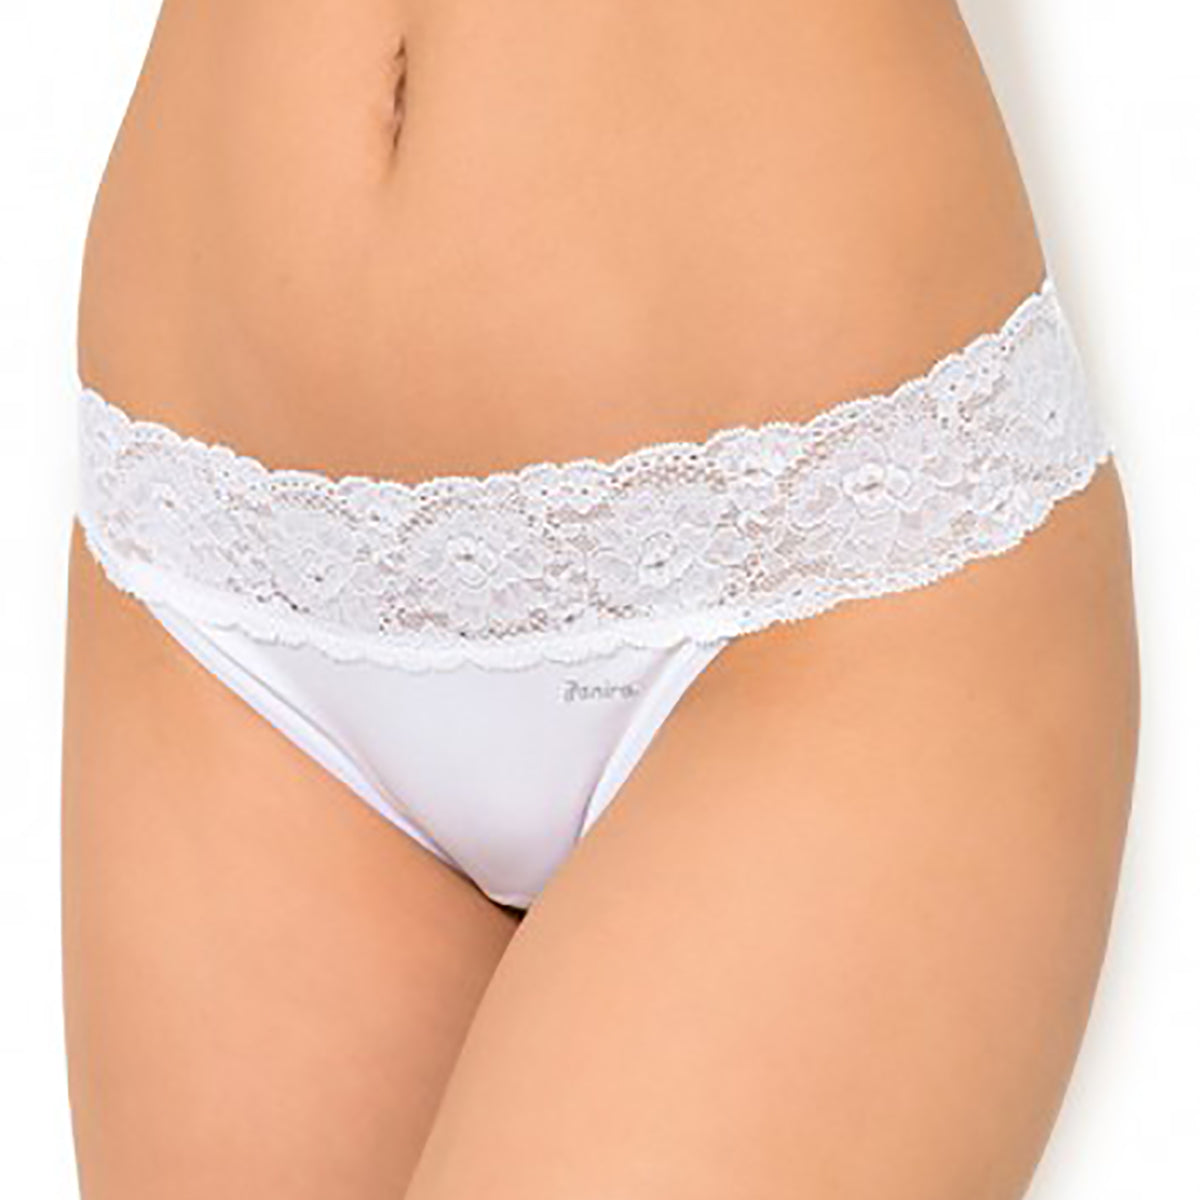 Orchid Simply Lingerie - ✨ Enhance your natural silhouette with the Beyond  Naked high waist shaping brief by Wacoal Europe. 💁Made with 50% Pima  cotton for pure comfort, this shaping brief offers